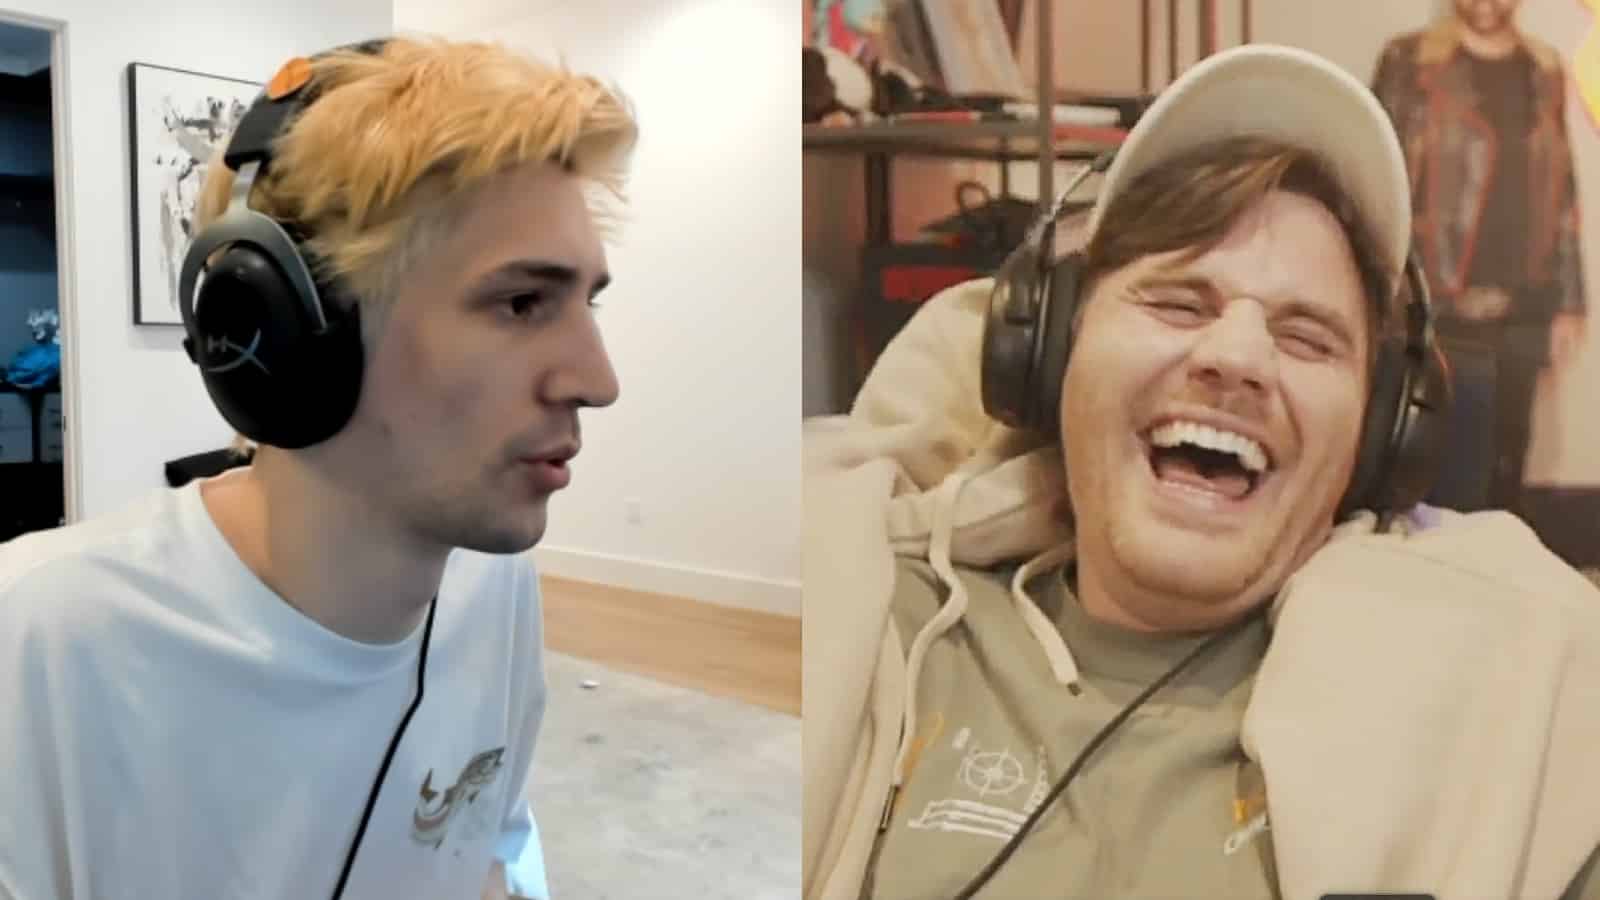 xQc and WillNeff